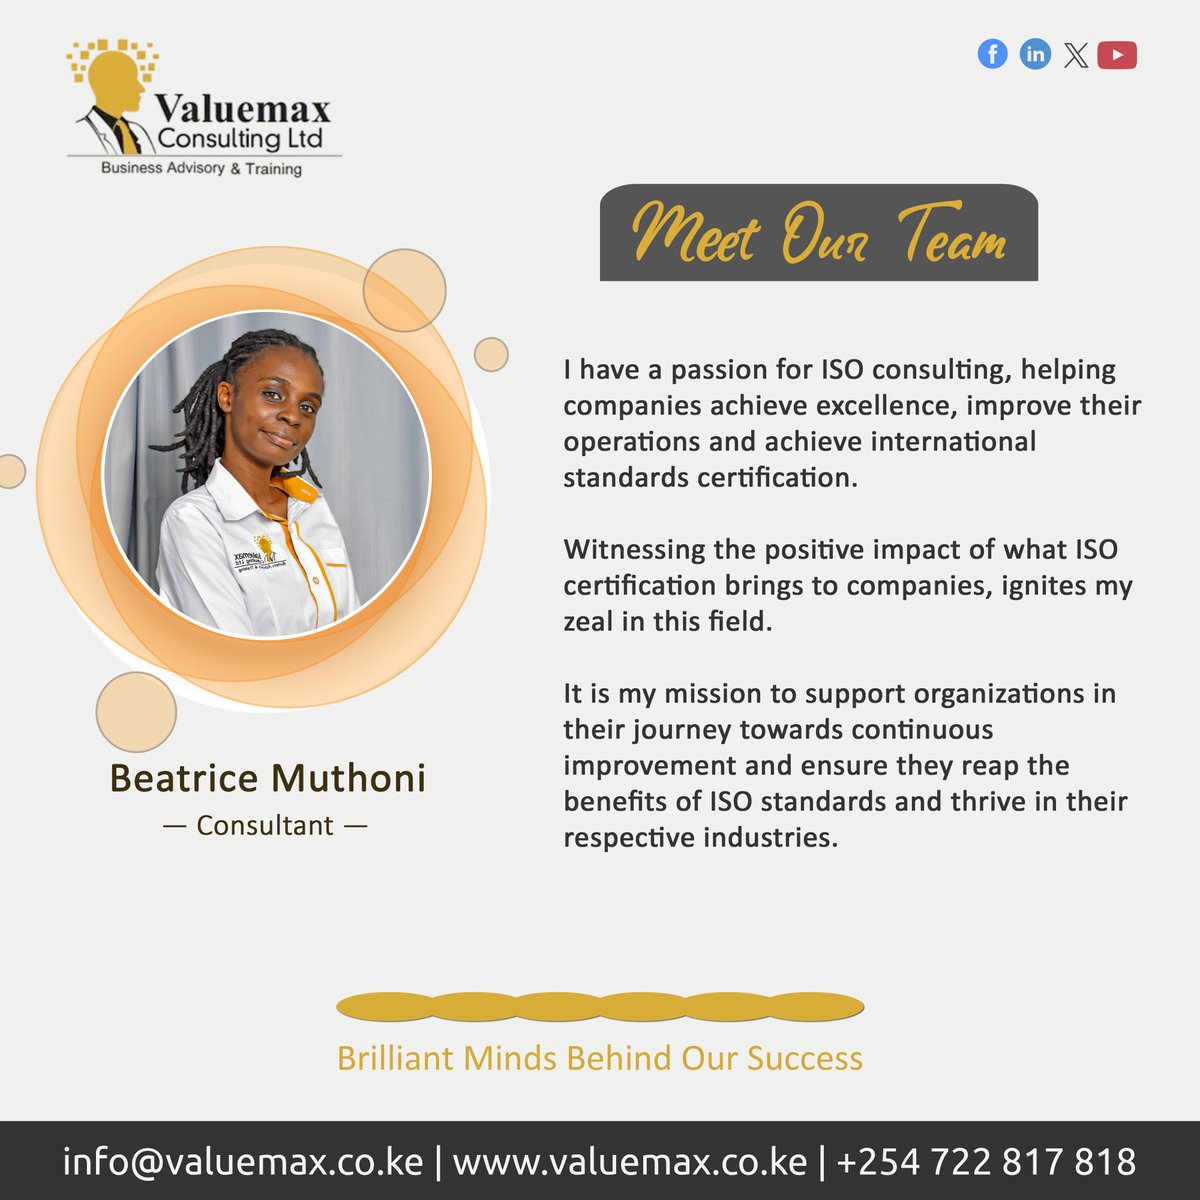 Meet Beatrice Muthoni. A very resourceful consultant at @Valuemaxnairobi  and passionate about ISO Standards.

We celebrate her commitment and great contribution to serving our clients with excellence.

#StaffRecognition #Team #Valuemax #ISOStandards #MeetOurTeam #Friday